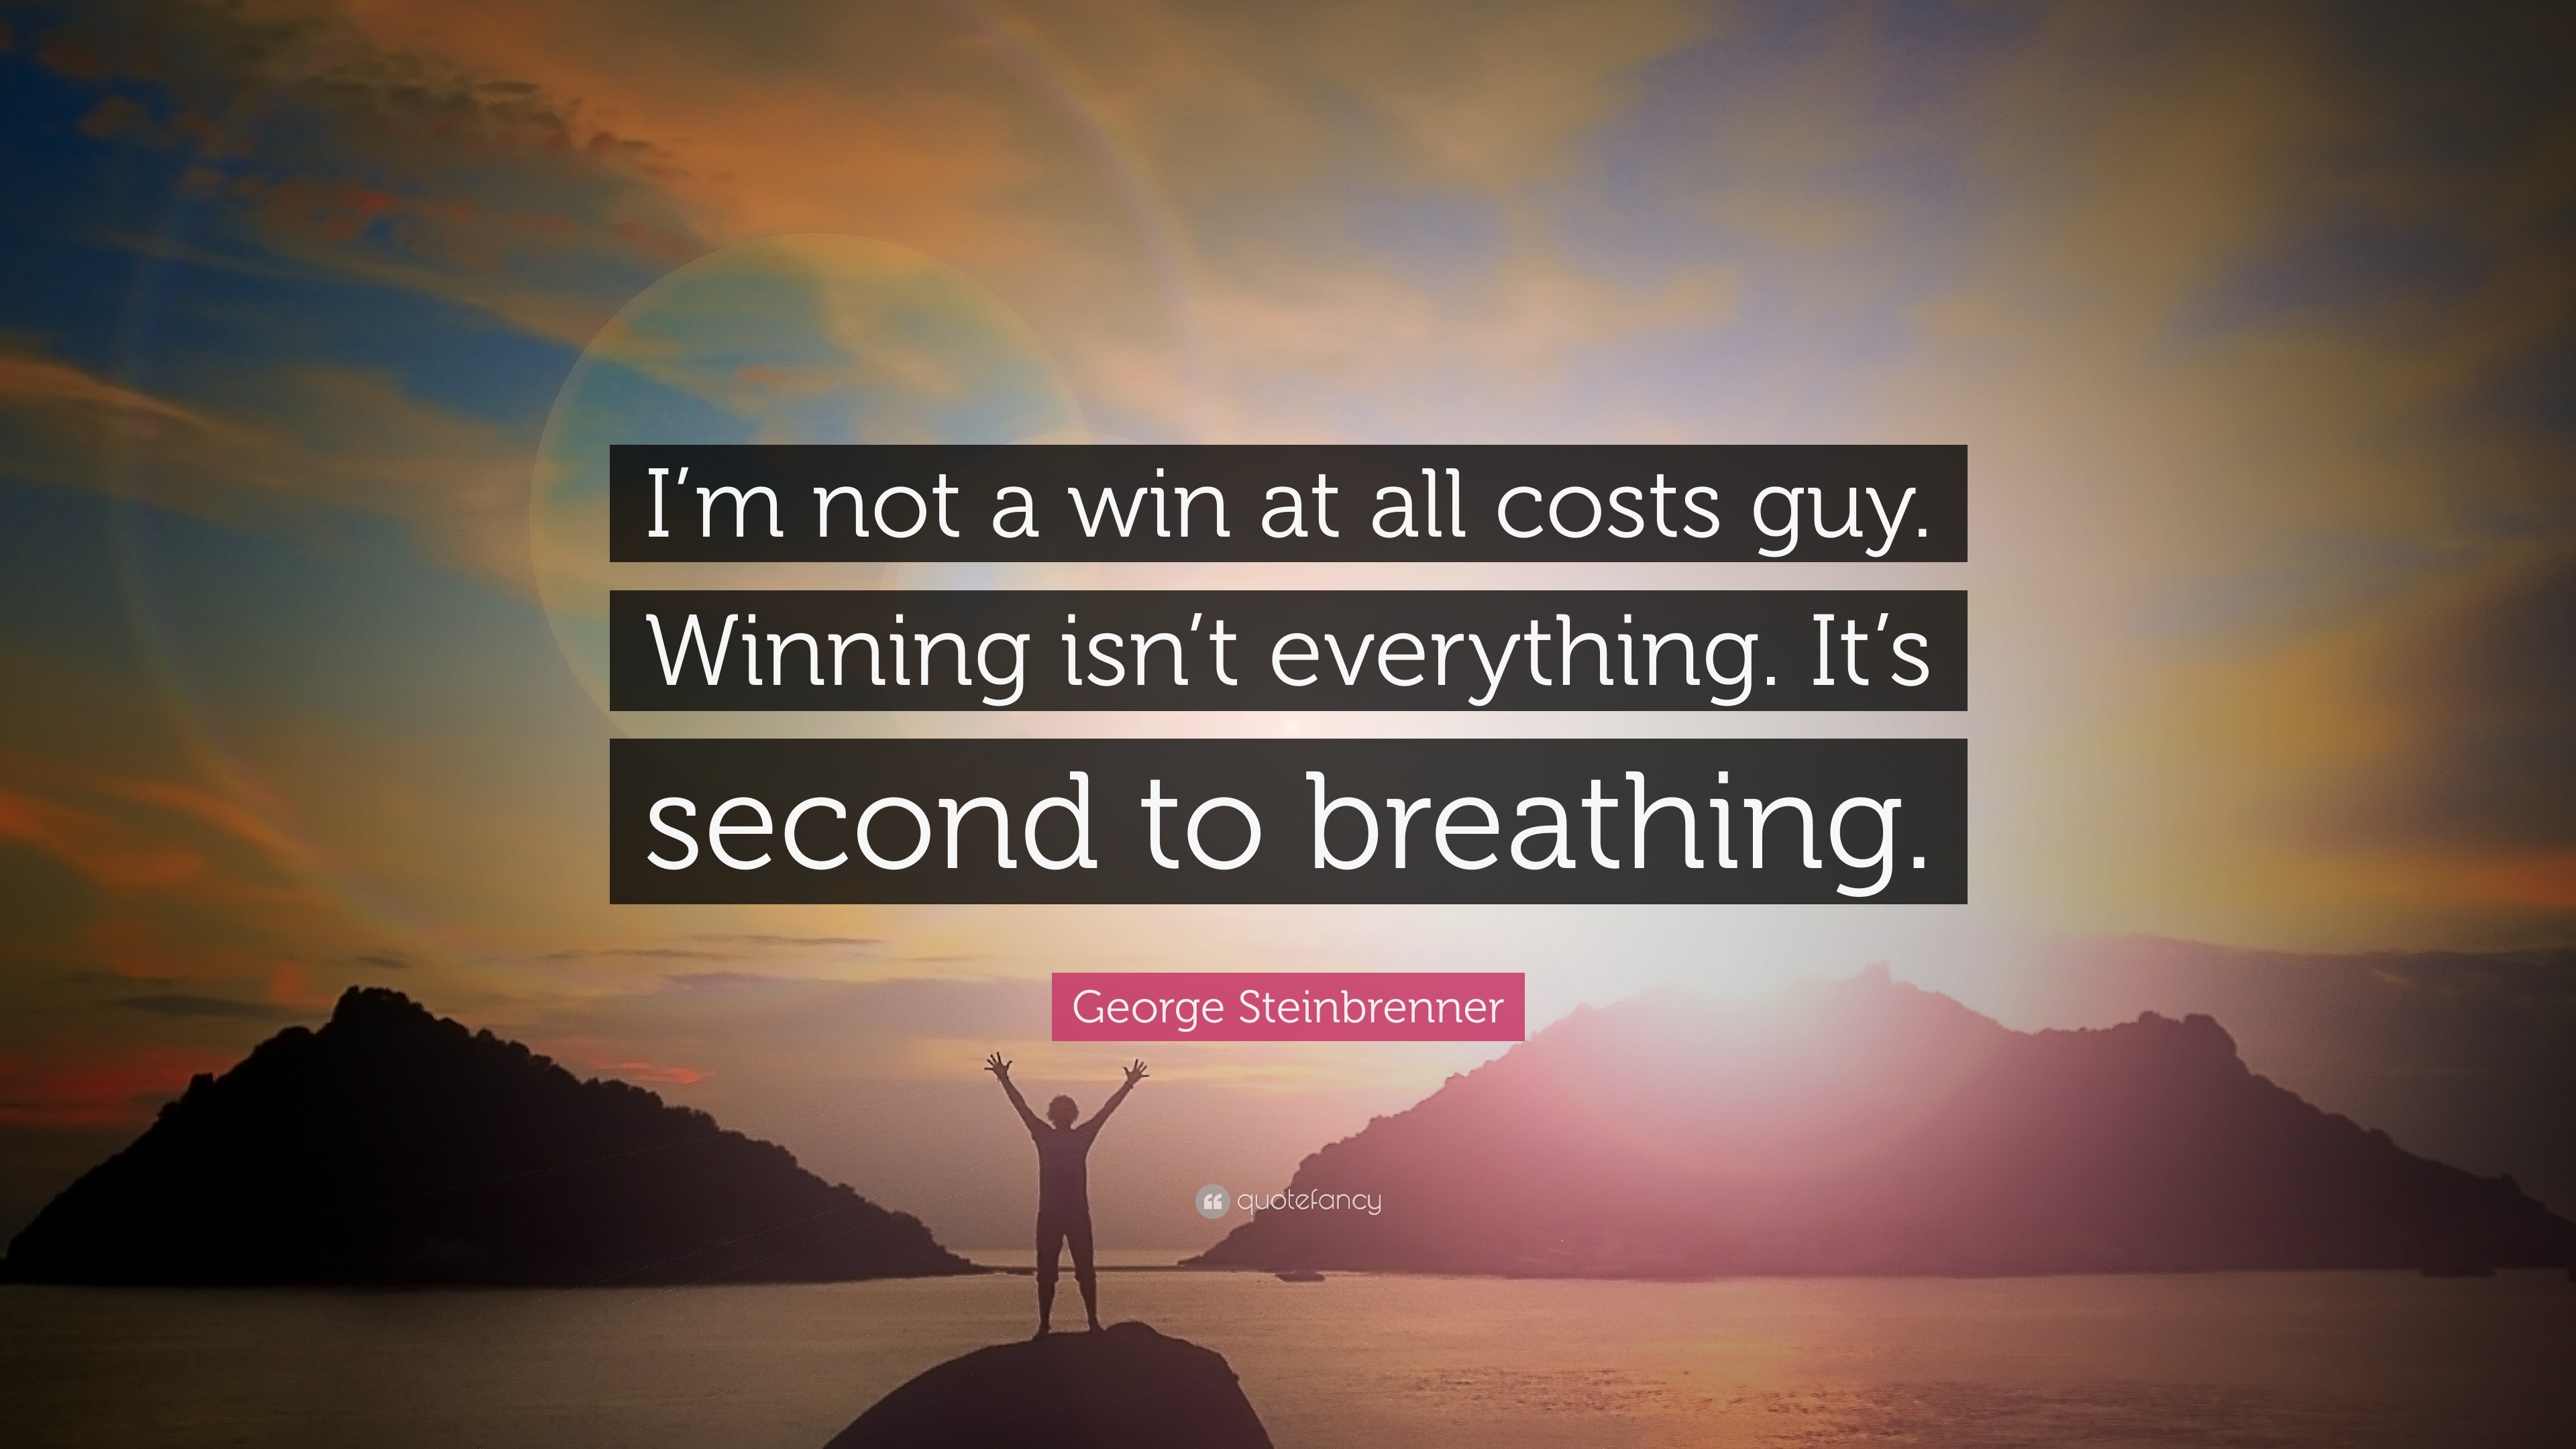 George Steinbrenner Quote: “I'm Not A Win At All Costs Guy. Winning Isn't Everything.